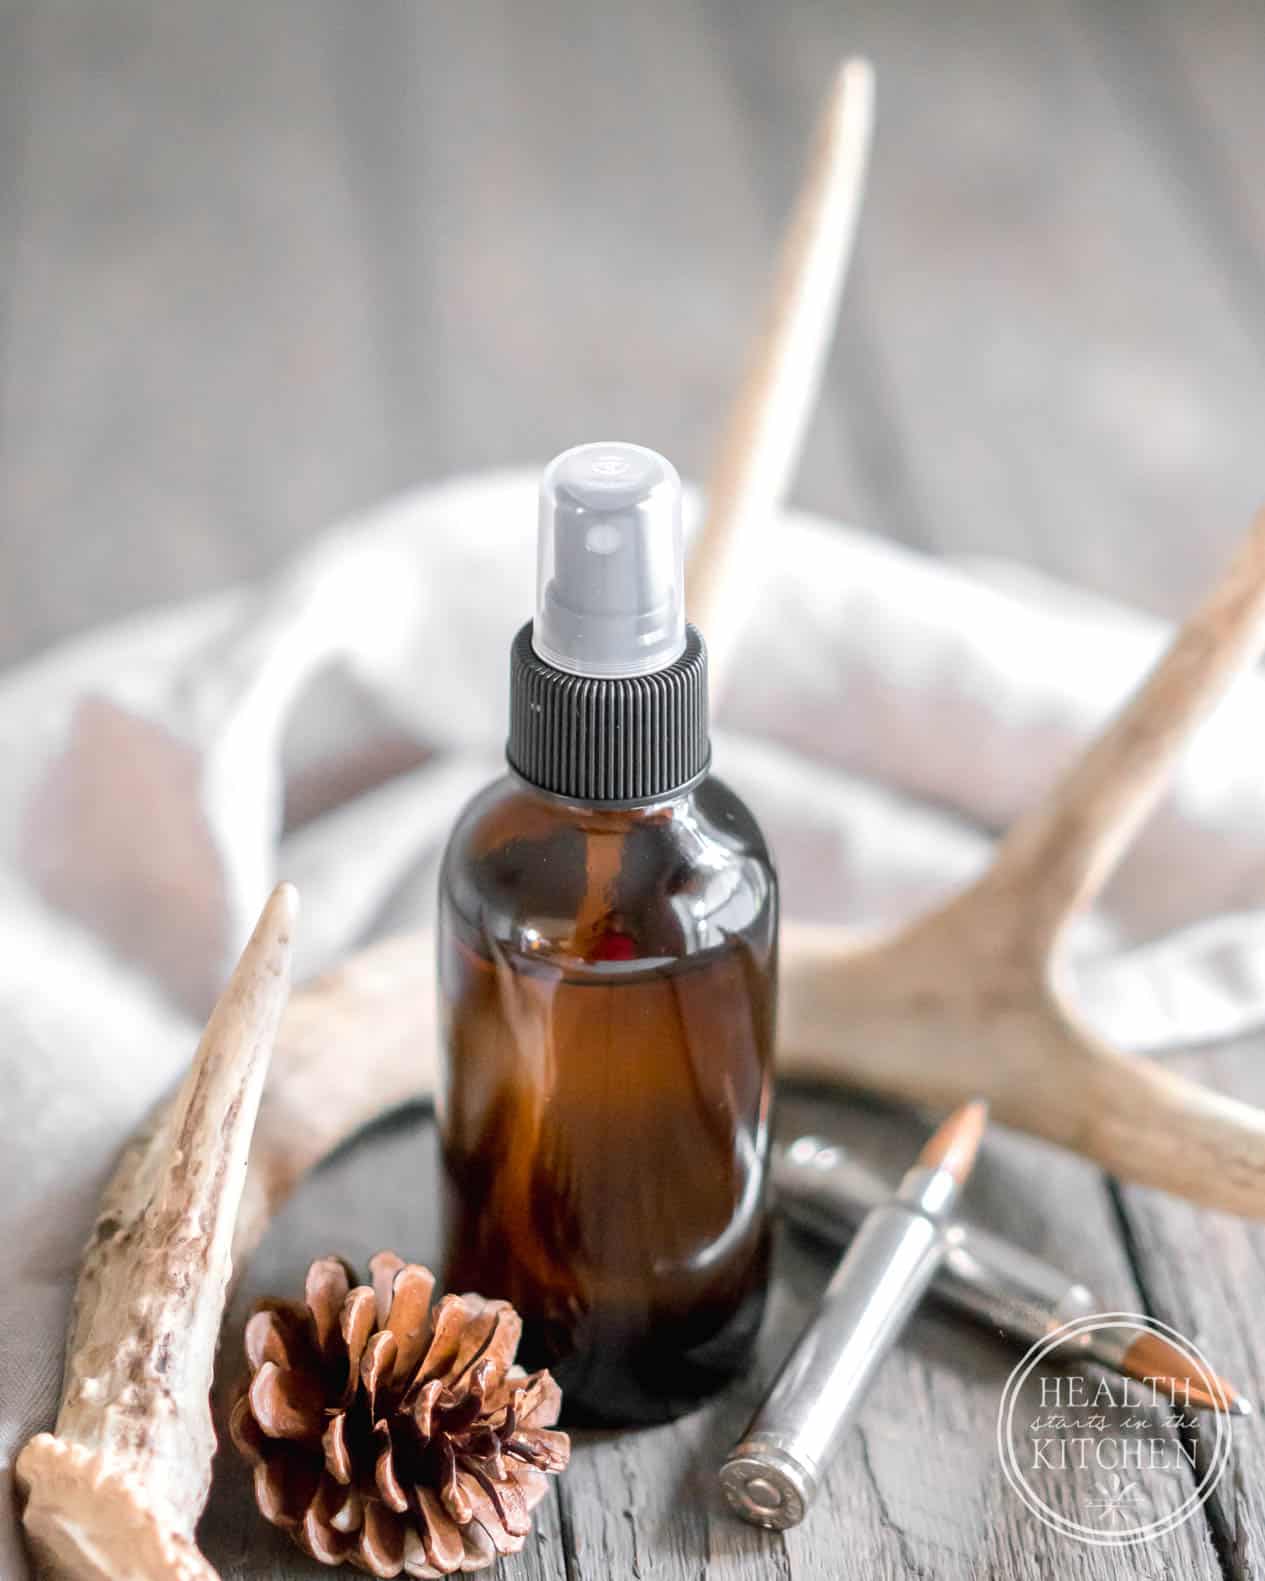 DIY Scent Away Hunting Spray made with Essential Oils